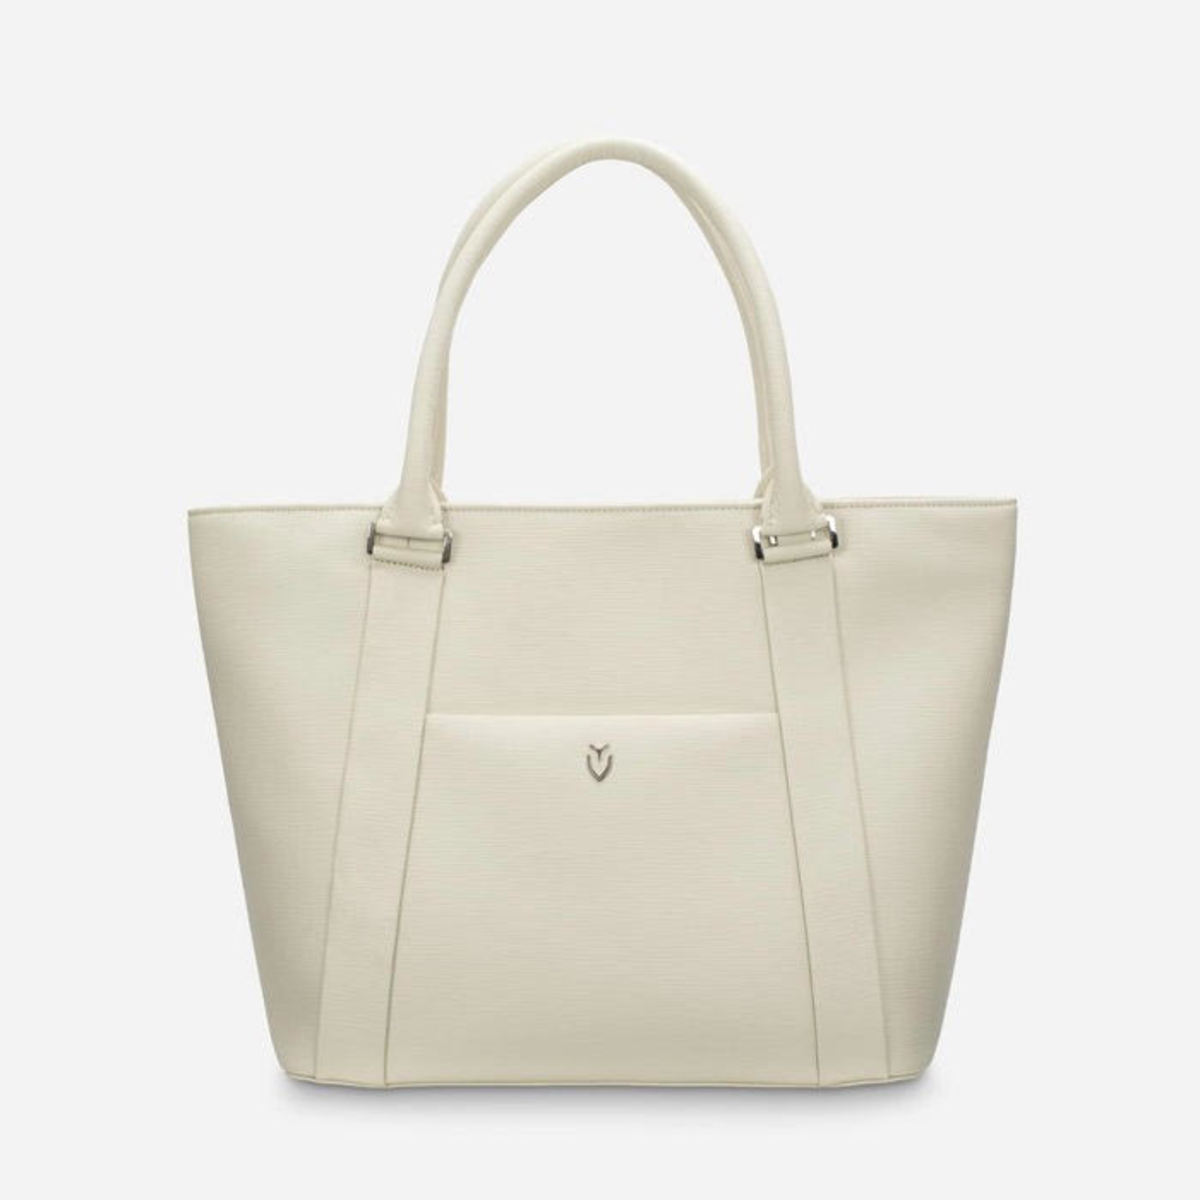 Vessell Tote